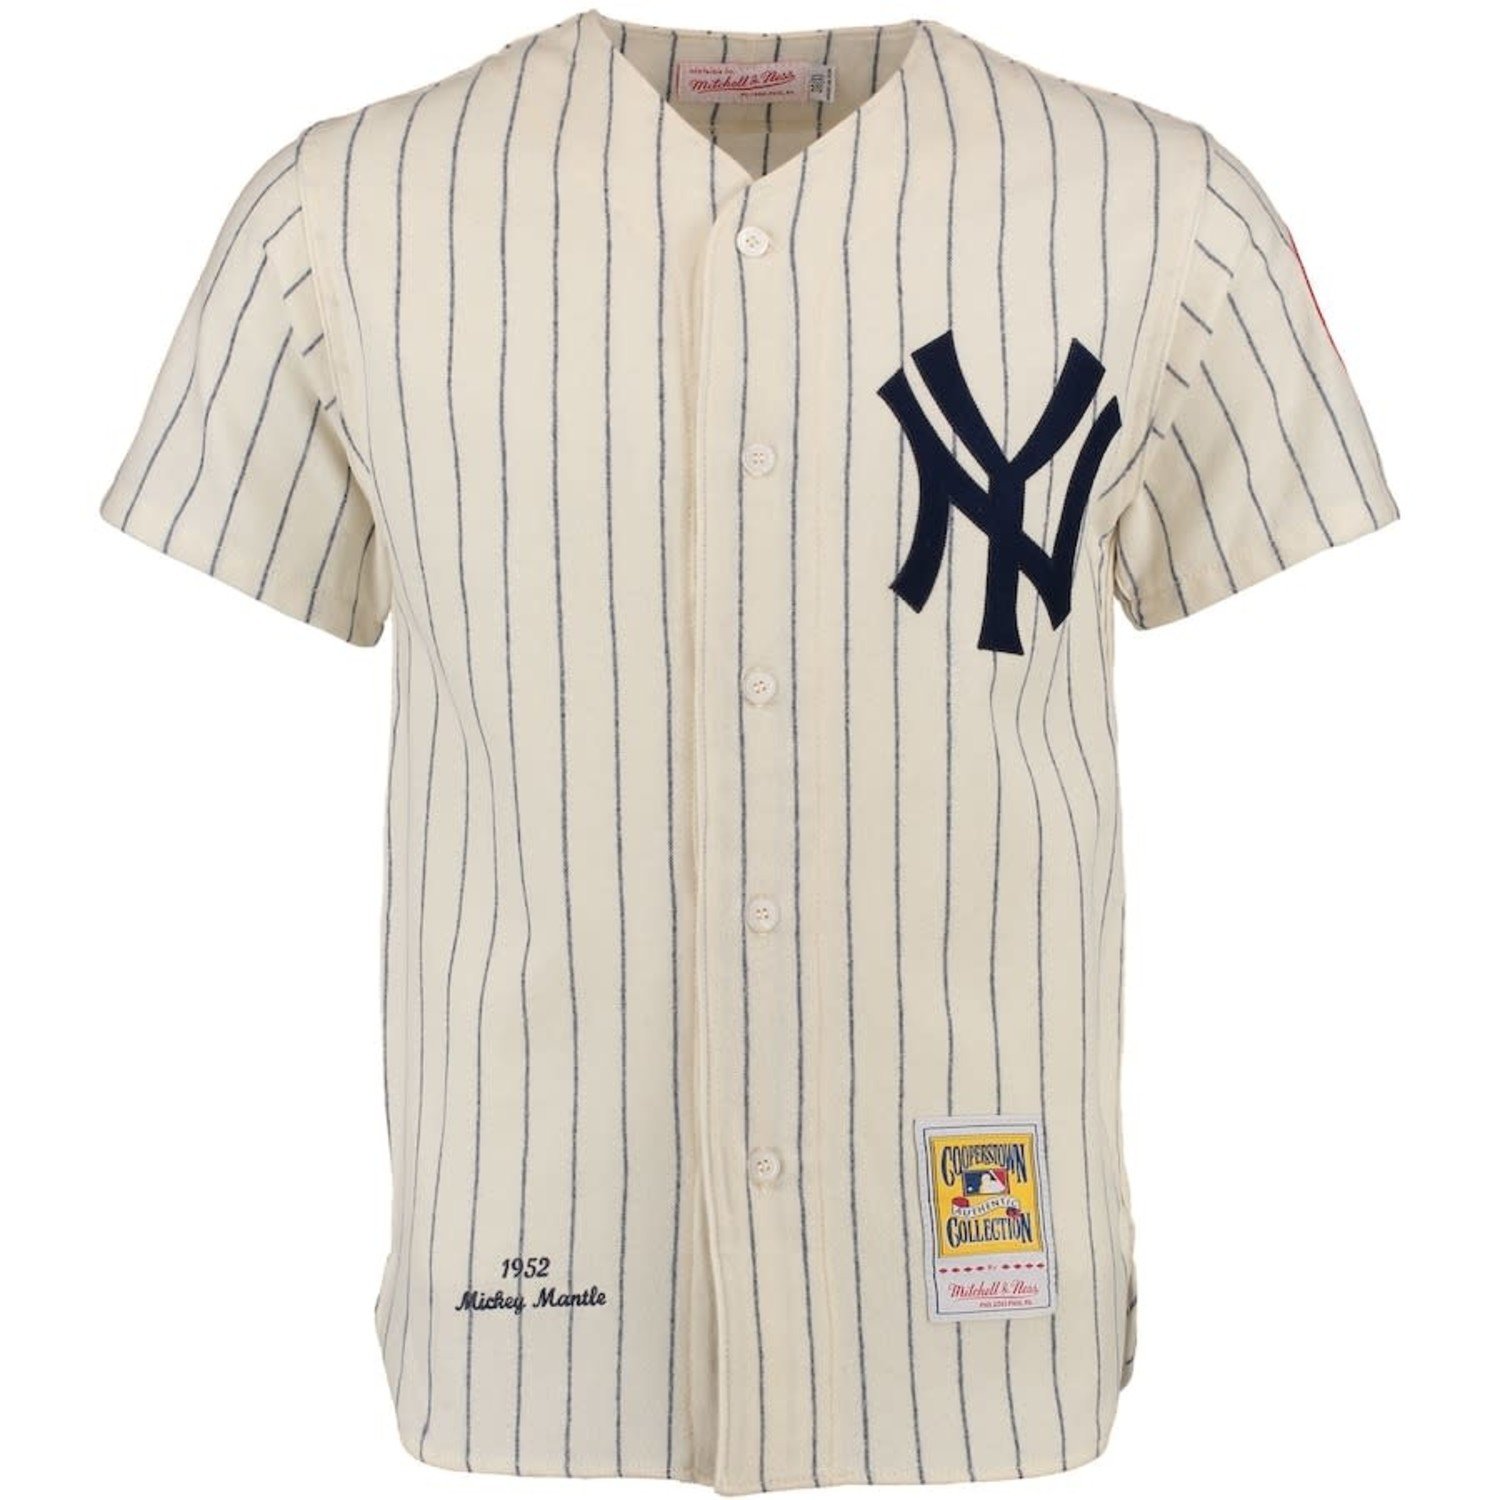 MICKEY MANTLE MITCHELL & NESS 1951 ROOKIE NEW YORK YANKEES JERSEY